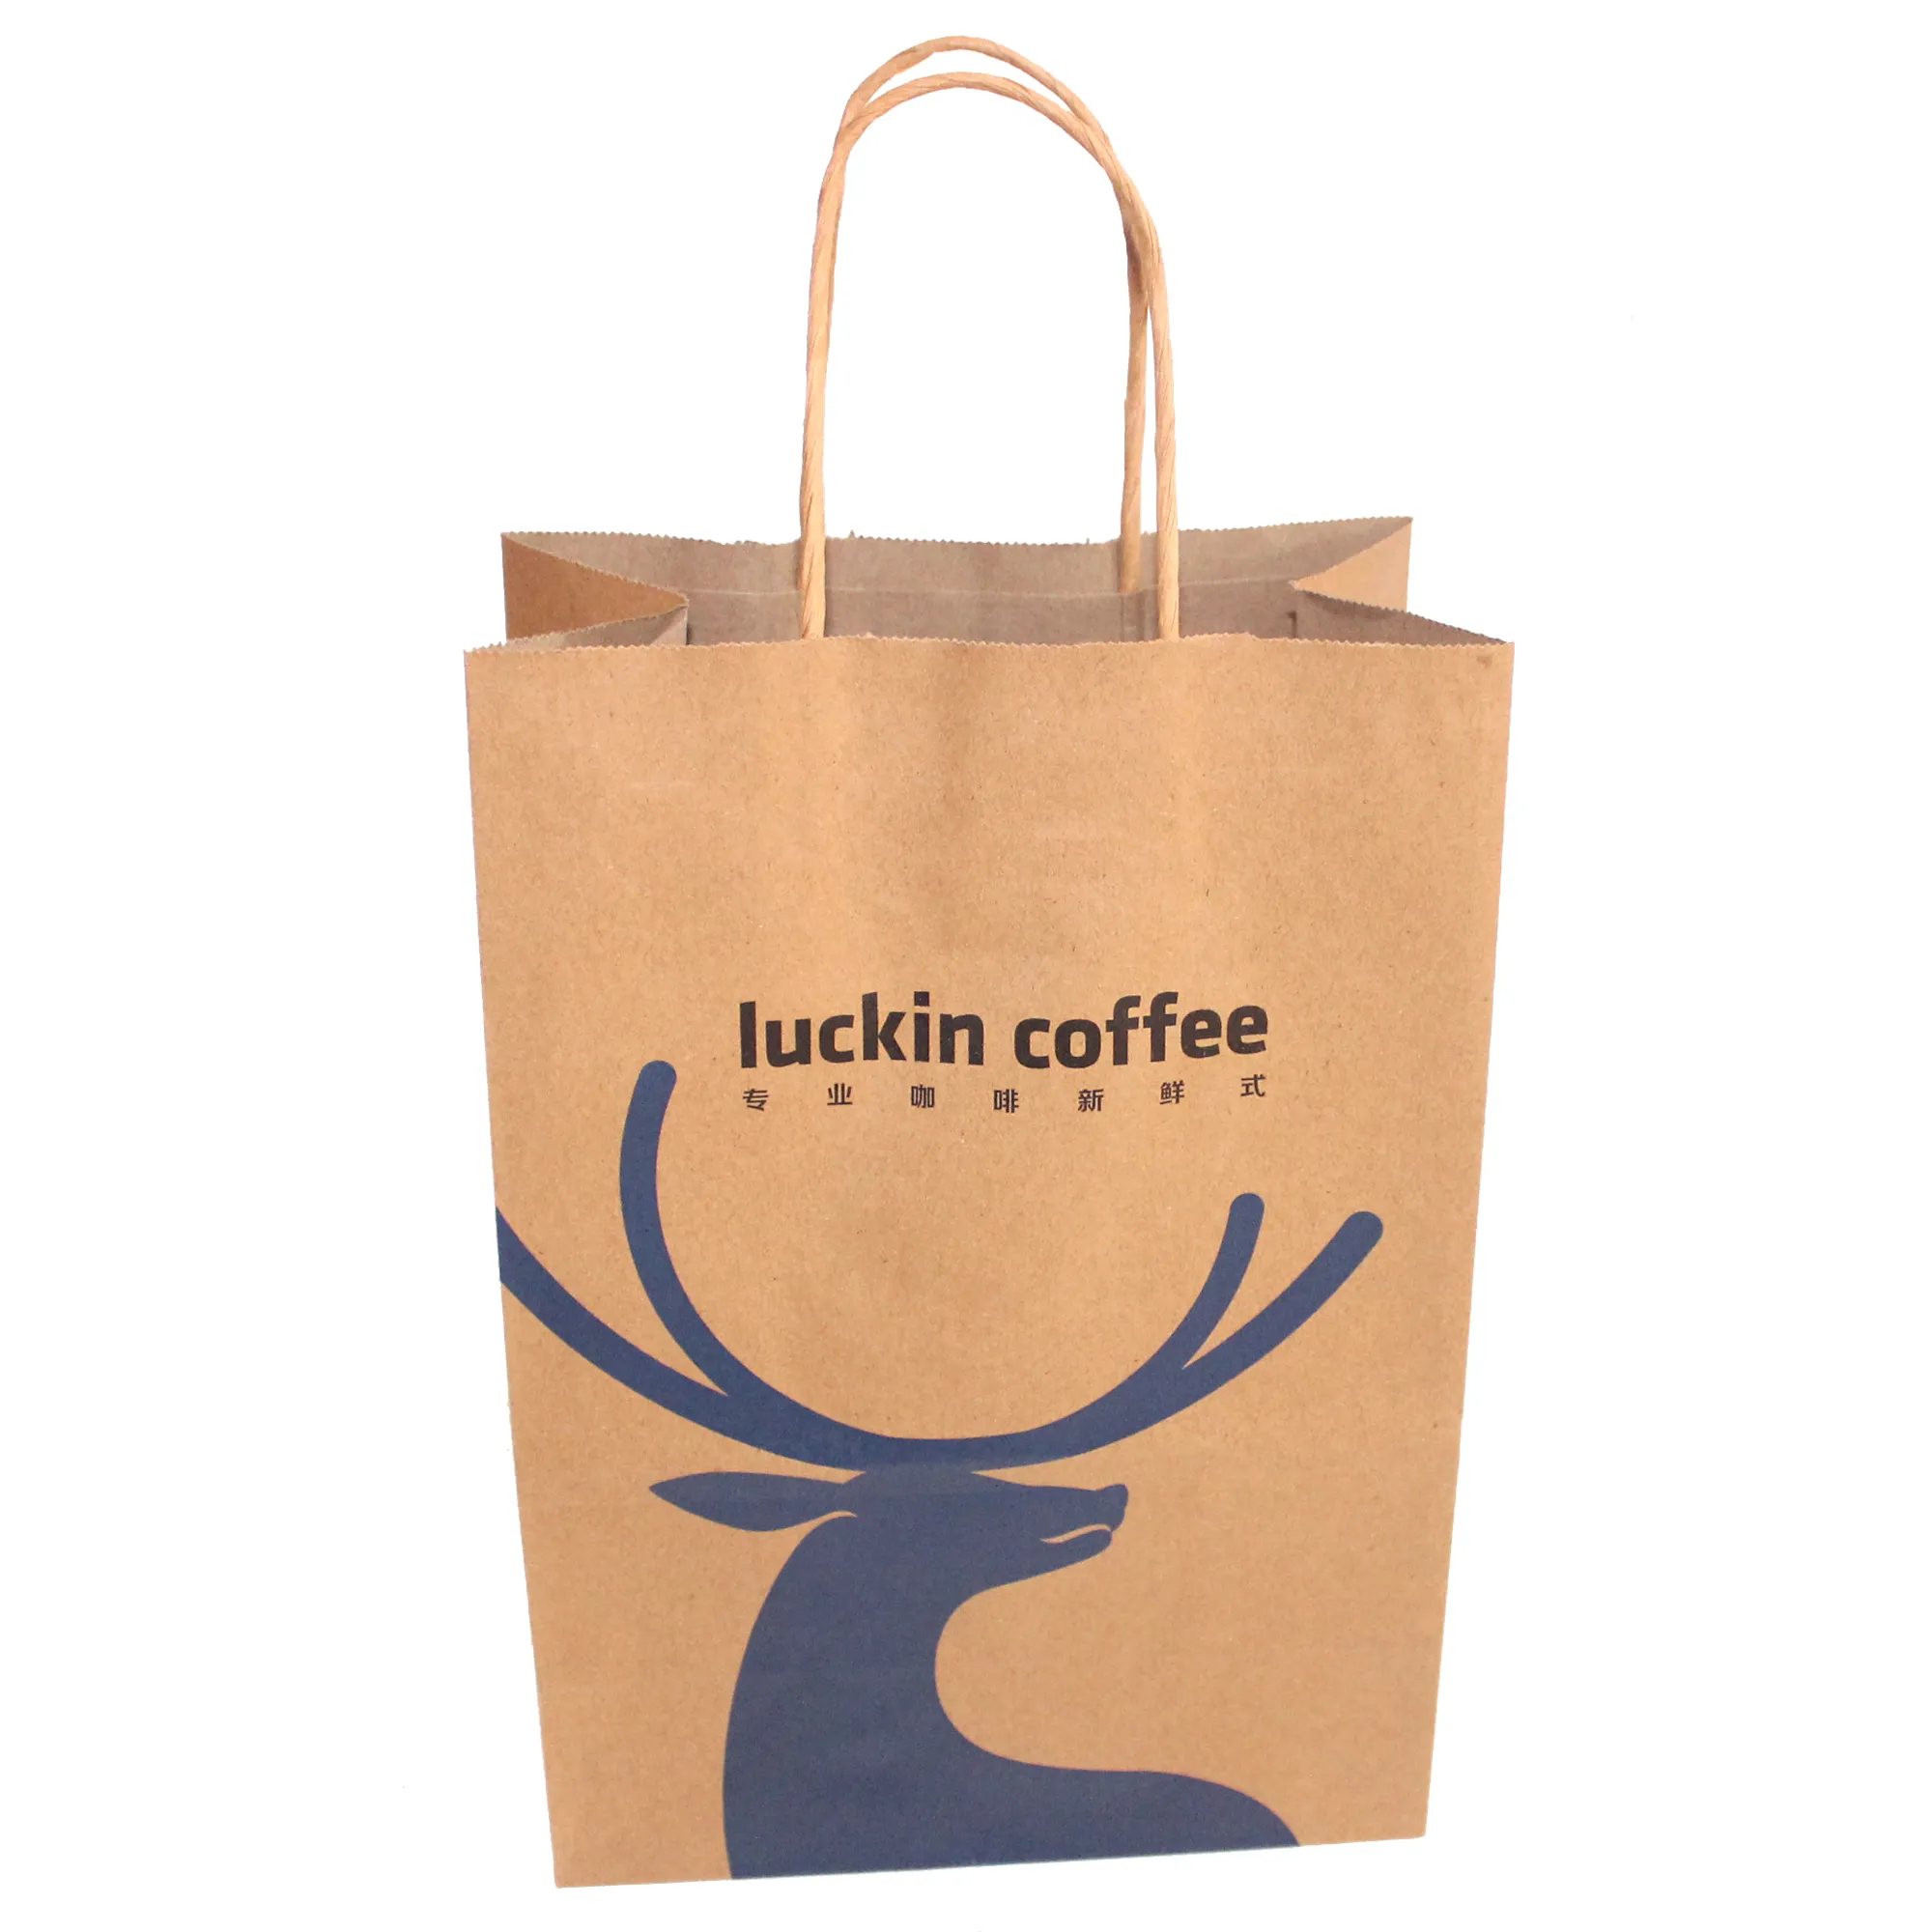 New super quality Machine made kraft paper bags100% recyclable Shopping paper bag